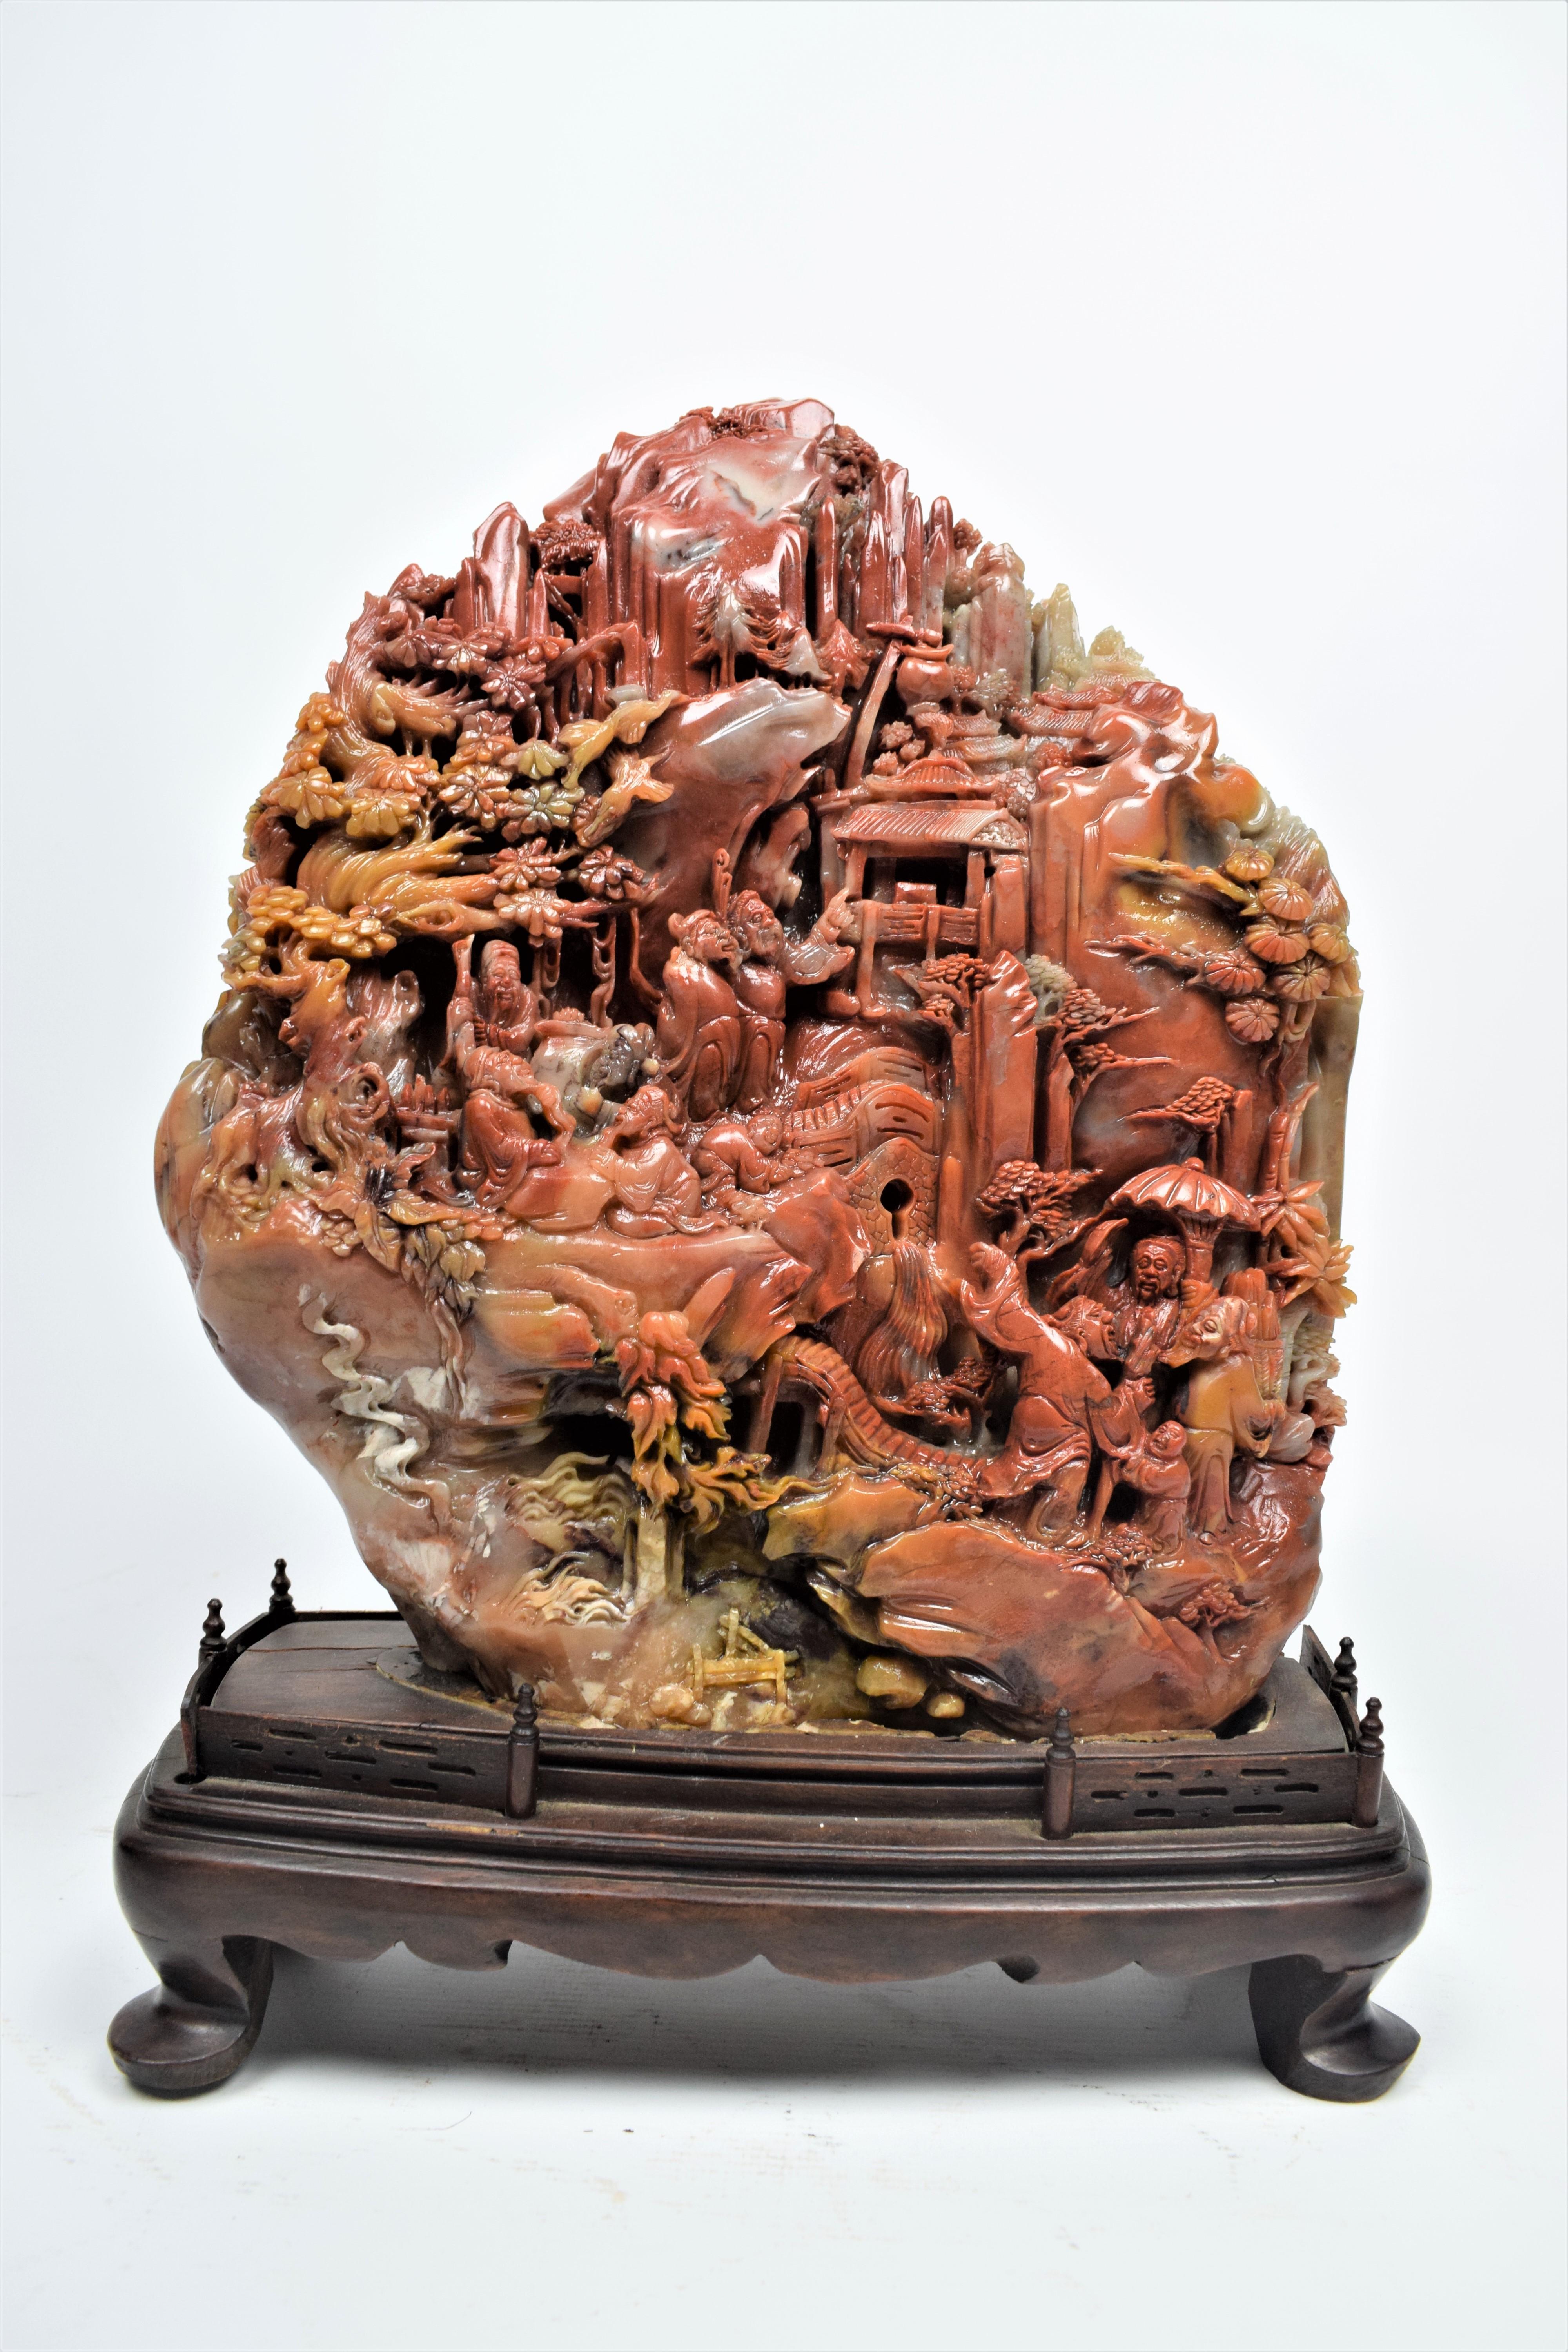 Chinese Soapstone Carving of a Buddhist Village Scene, Mid-20th century.
Shoushan stone carving is an art originating in Fujian Province in Eastern China. Use of the stone for carving can be traced back as far as the Southern Dynasties and has long